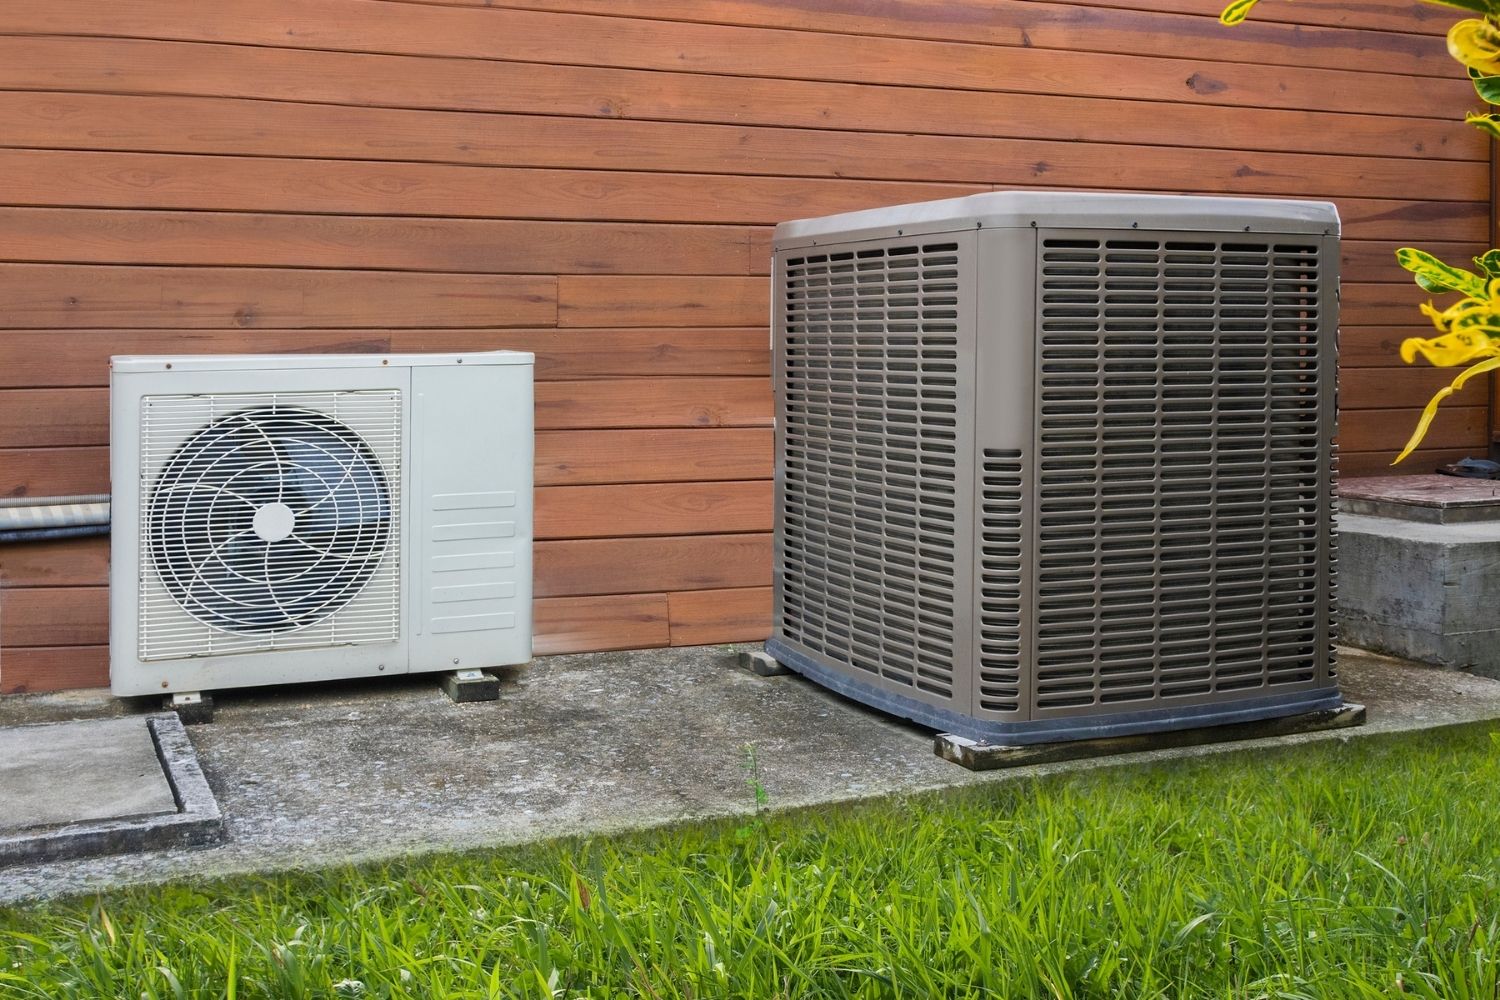 The best heat pump option installed outdoors